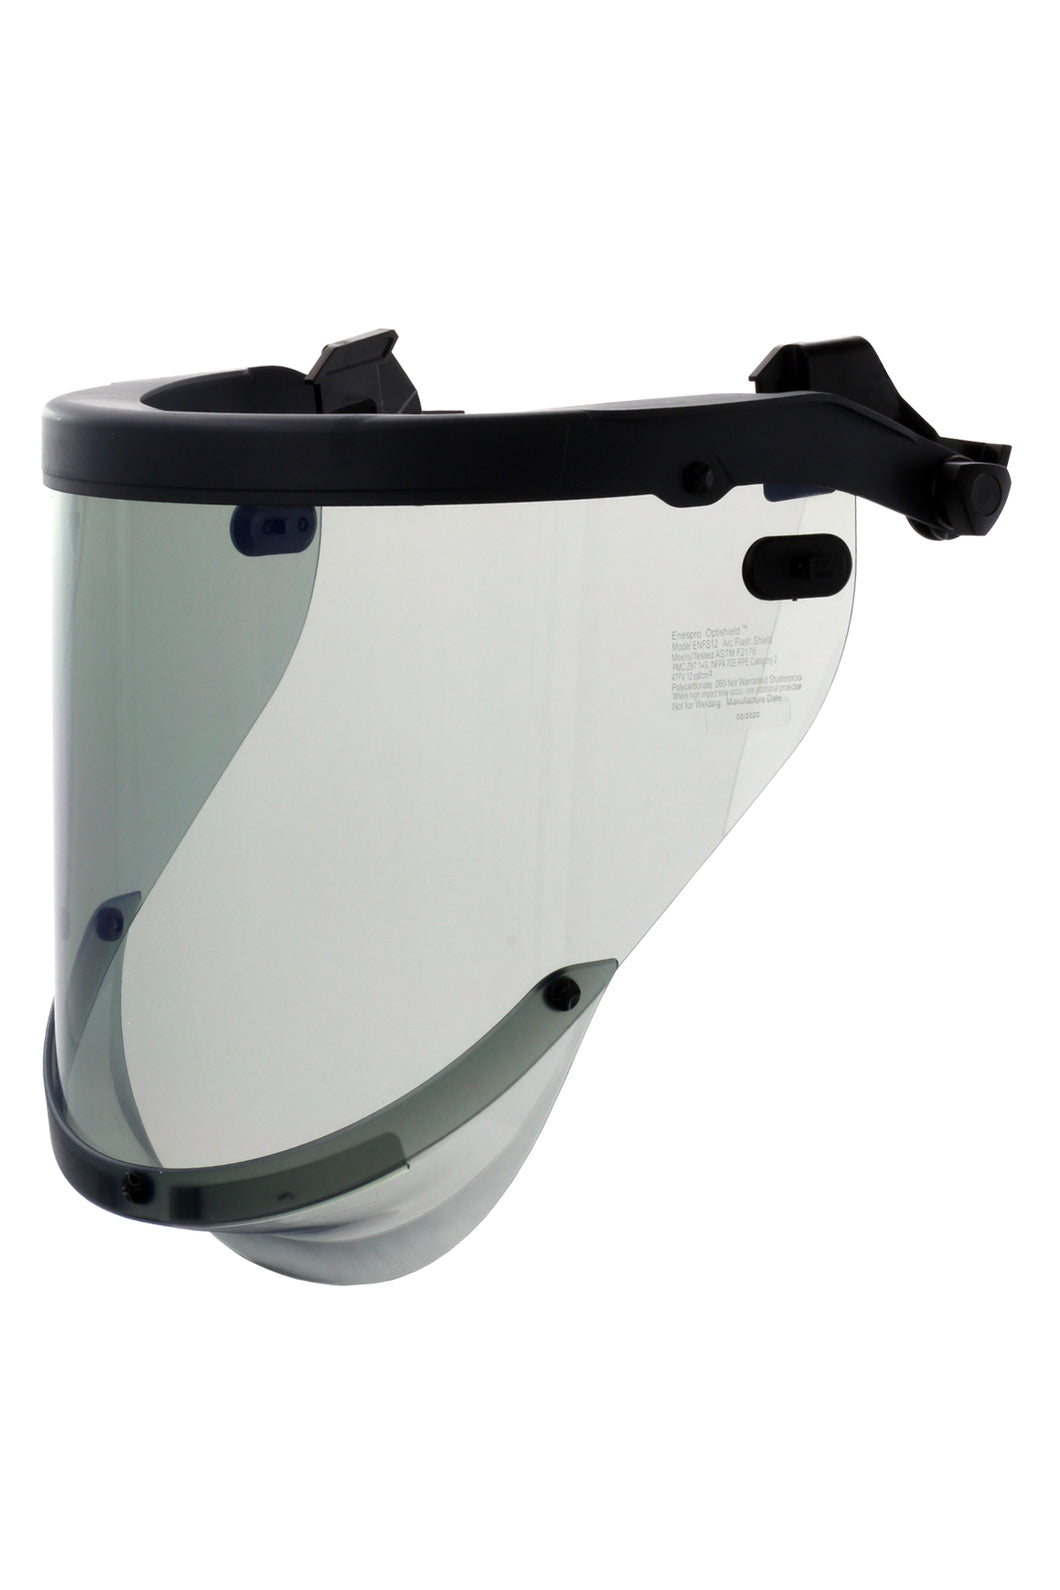 12 CAL Enespro Face Shield with Slotted Bracket